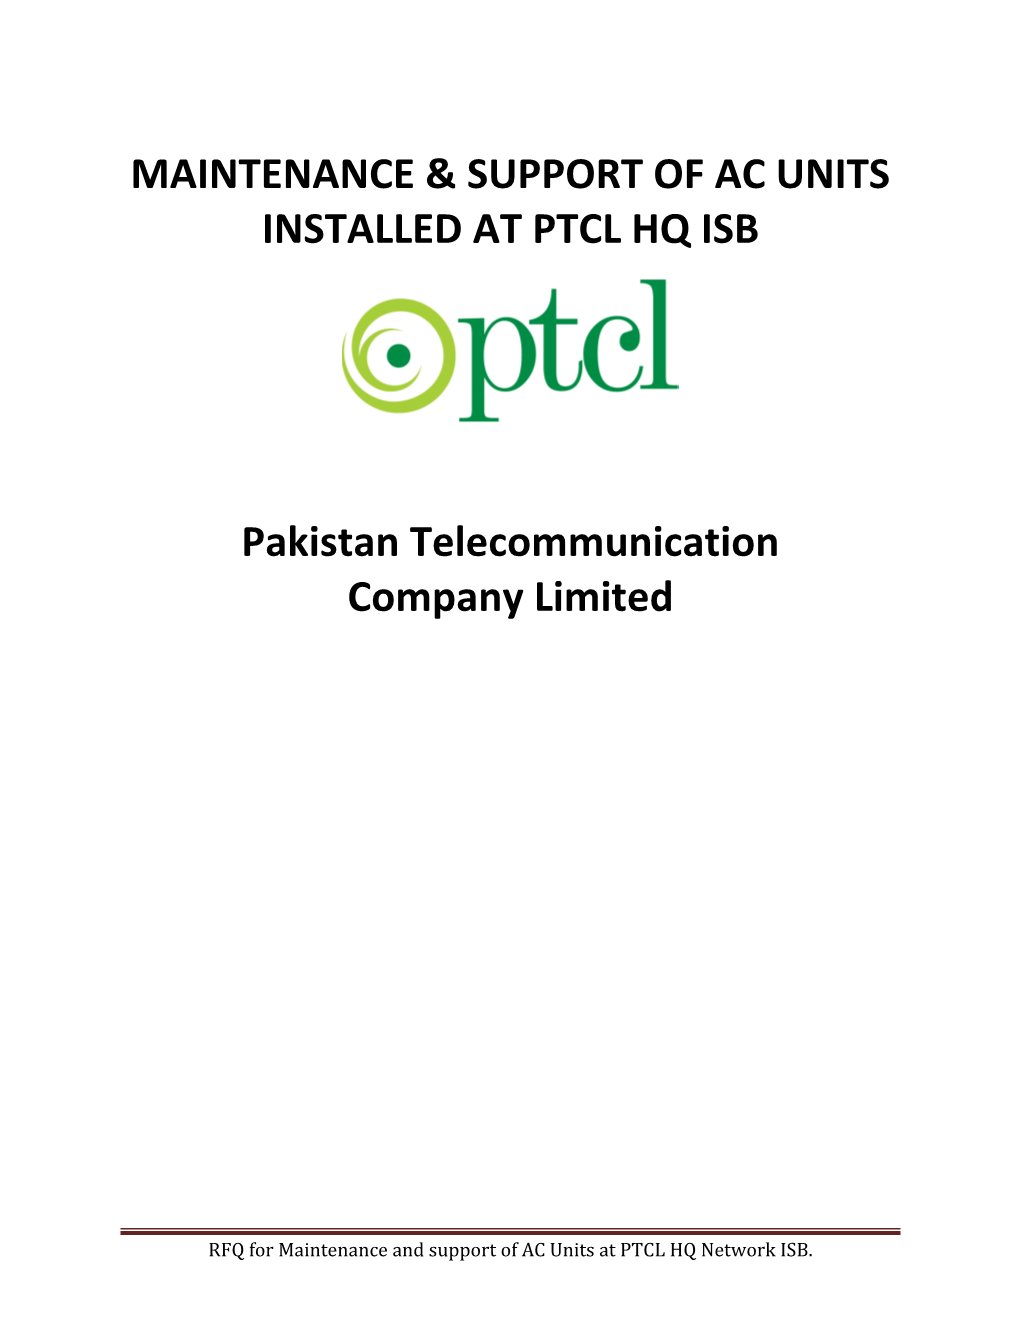 Maintenance & Support Ofac Units Installed at Ptcl Hq Isb